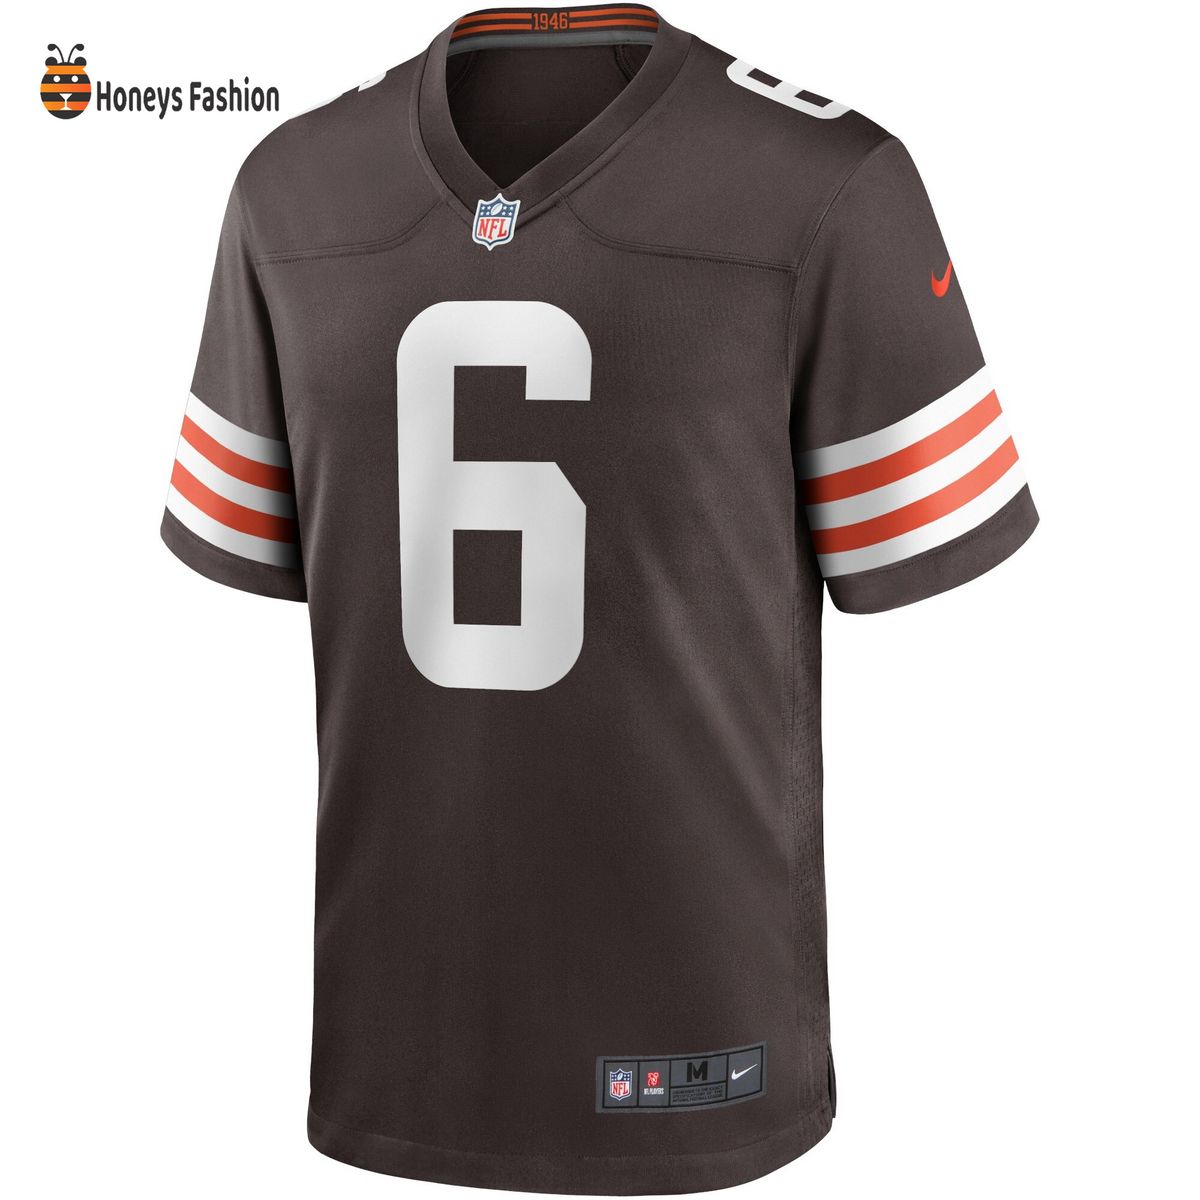 Baker Mayfield Cleveland Browns Nike Game Player Jersey